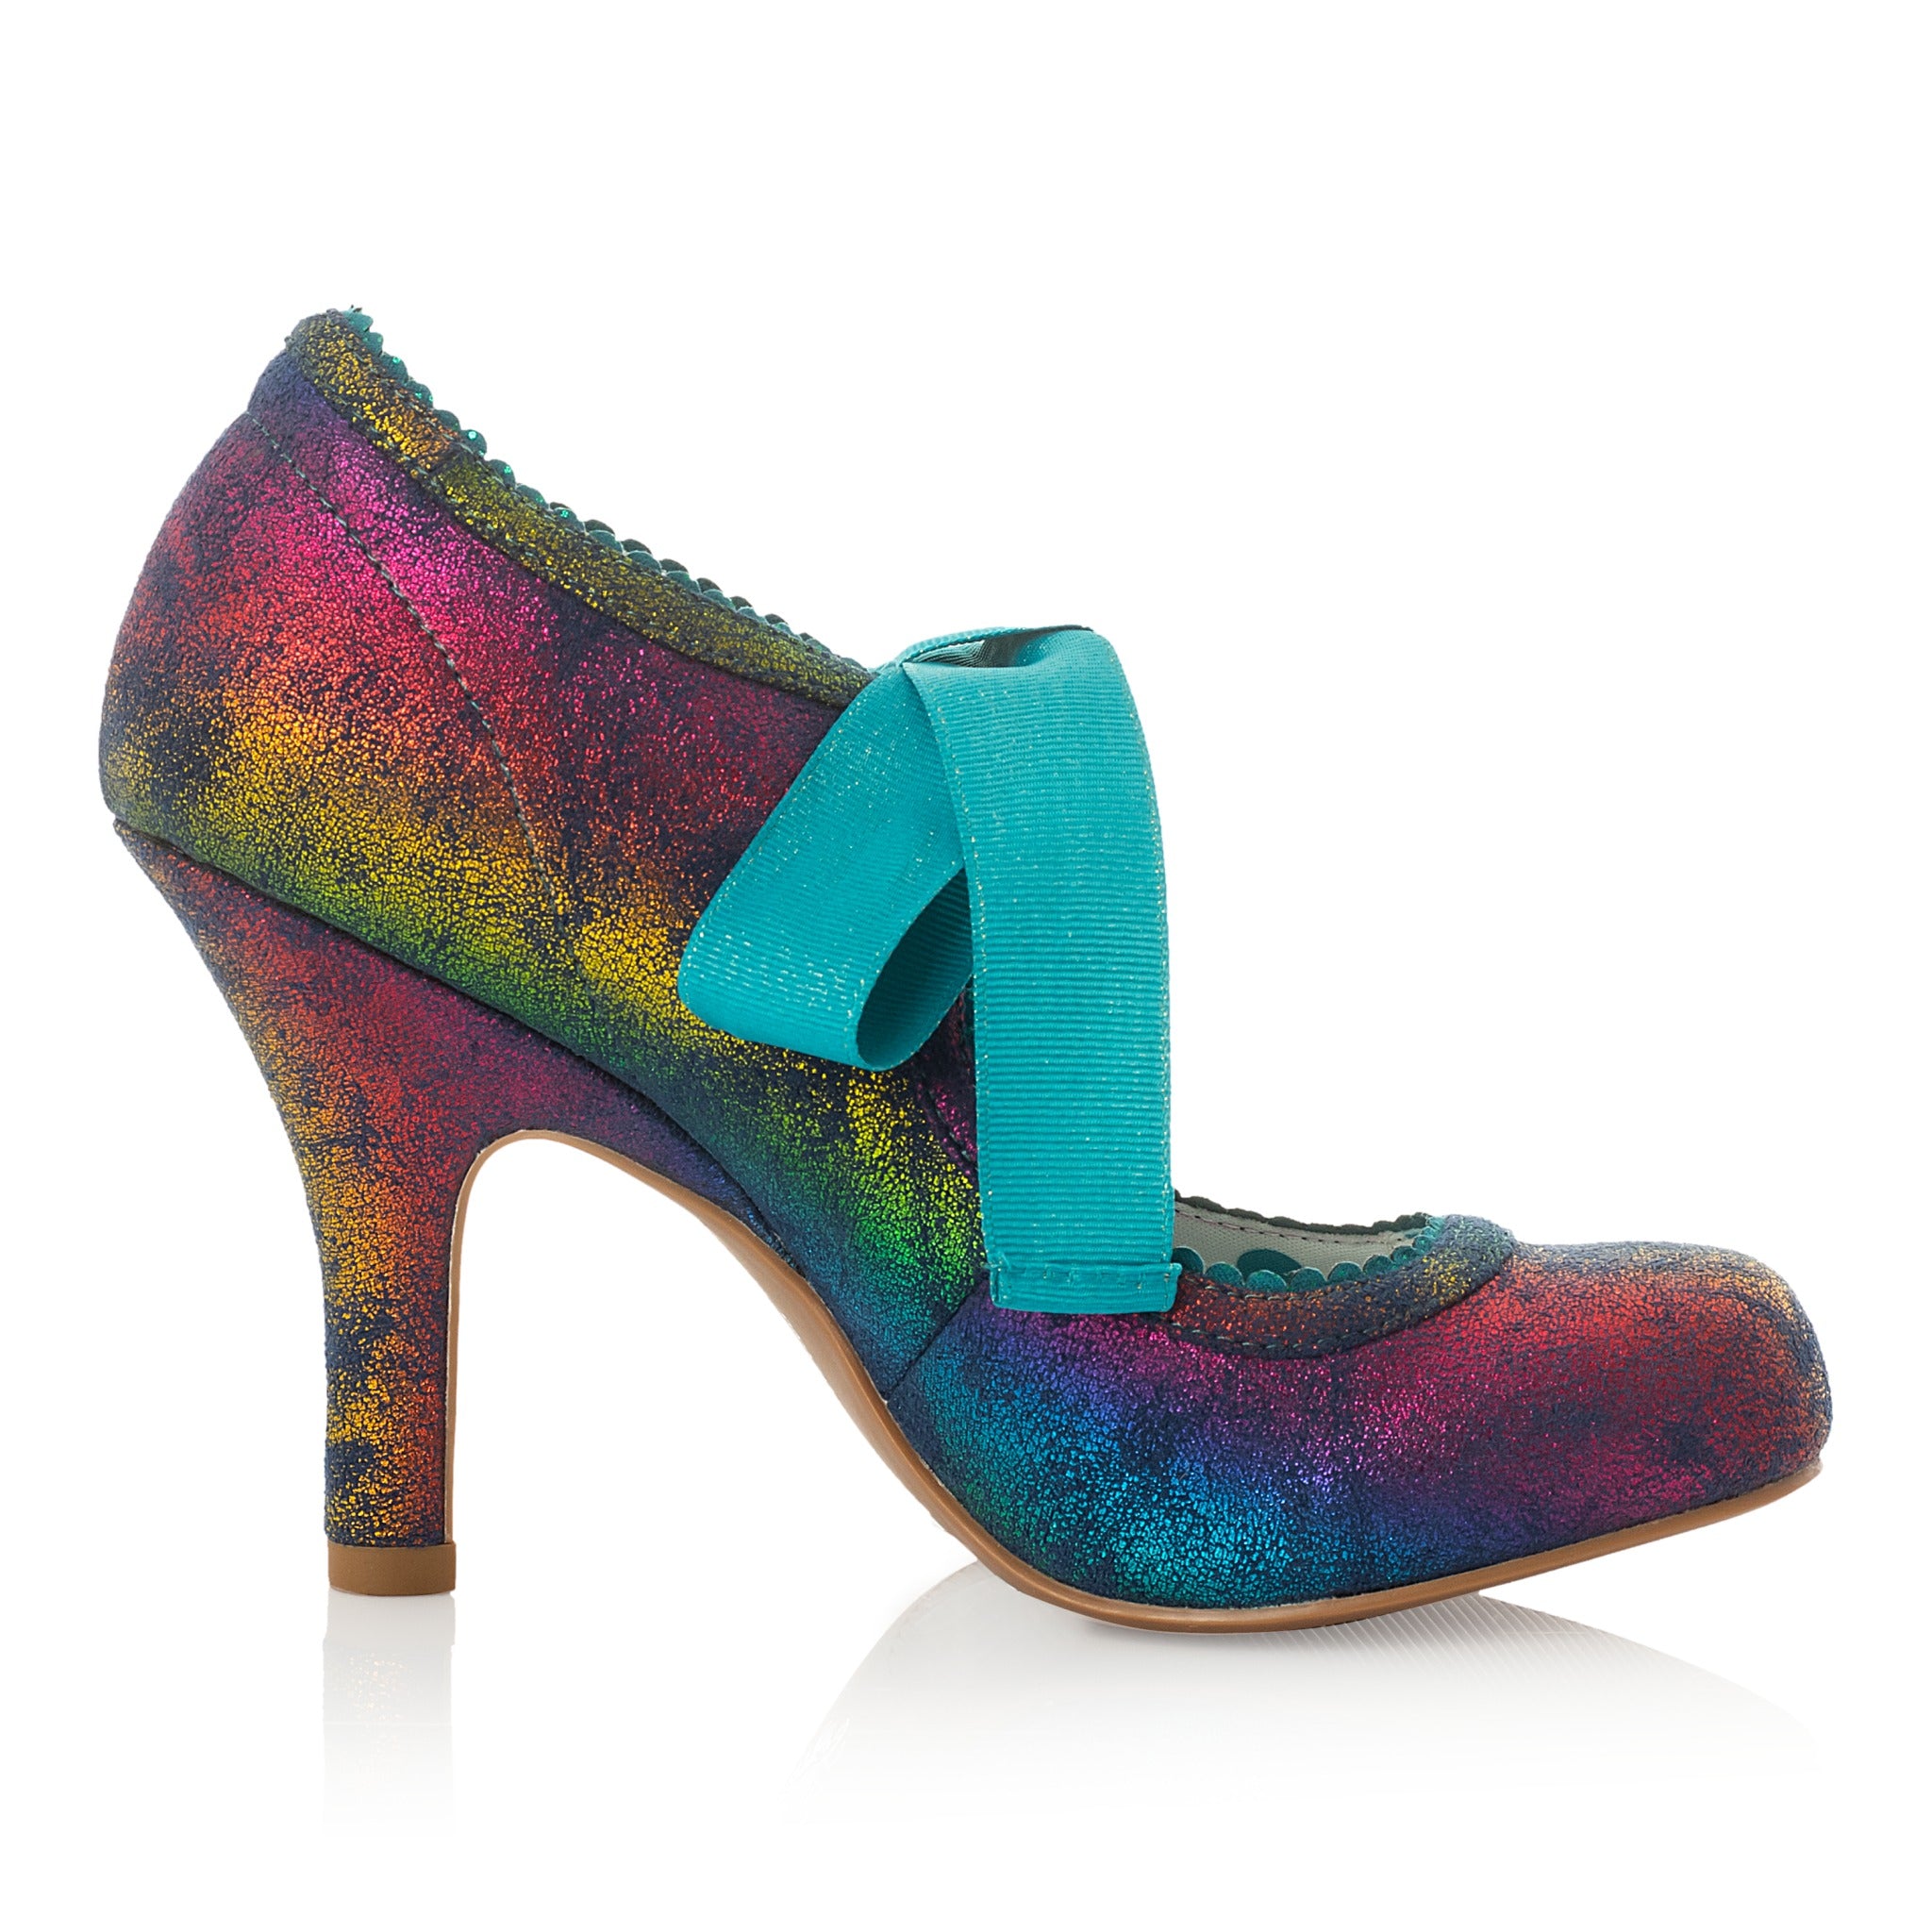 Ruby Shoo Willow Rainbow Ribbon Tie Court Shoes